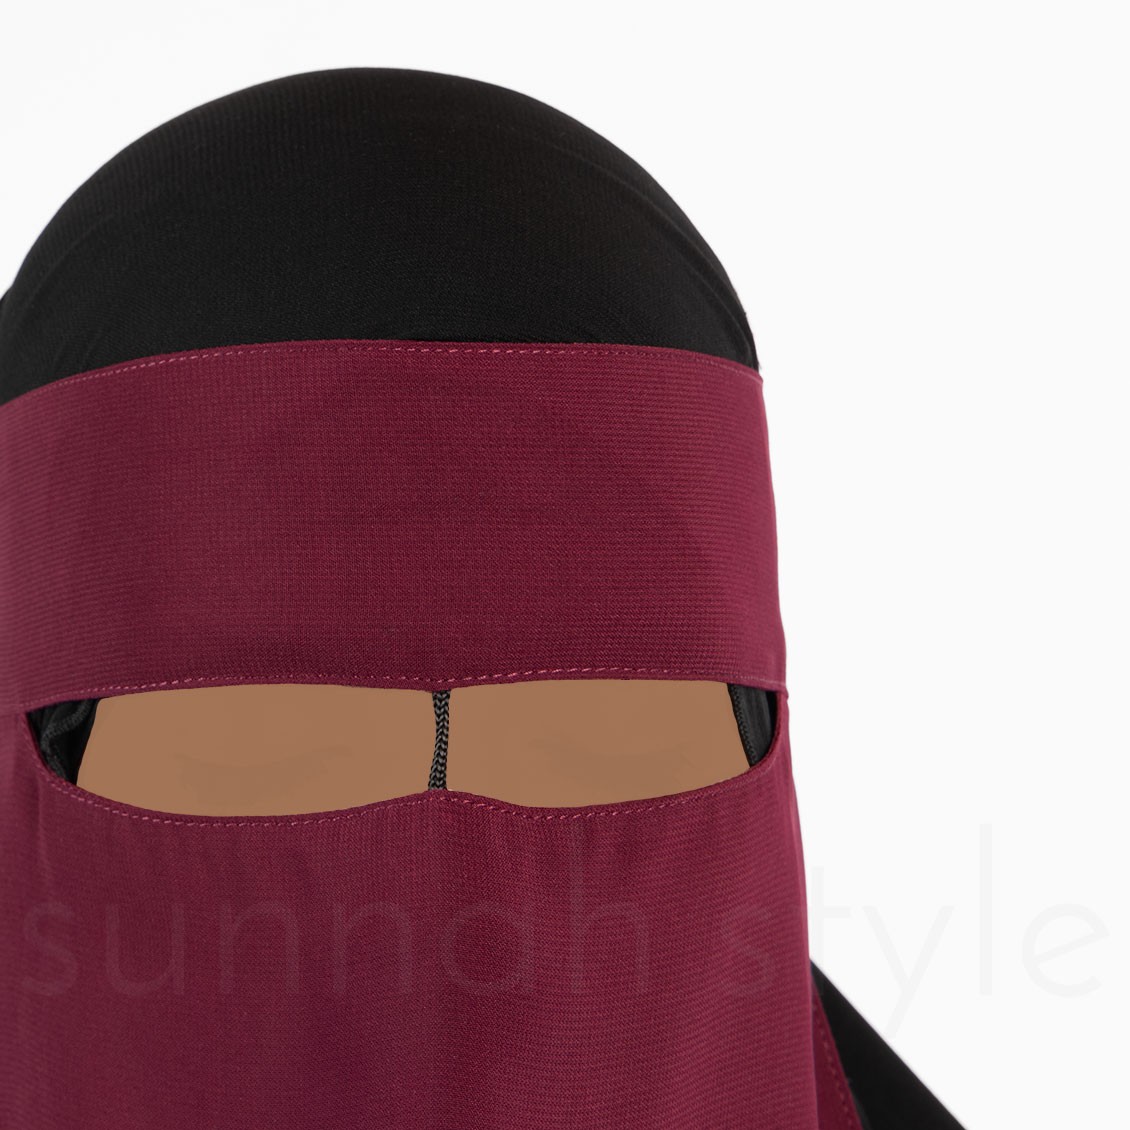 Sunnah Style One Layer Niqab w Nose String Burgundy